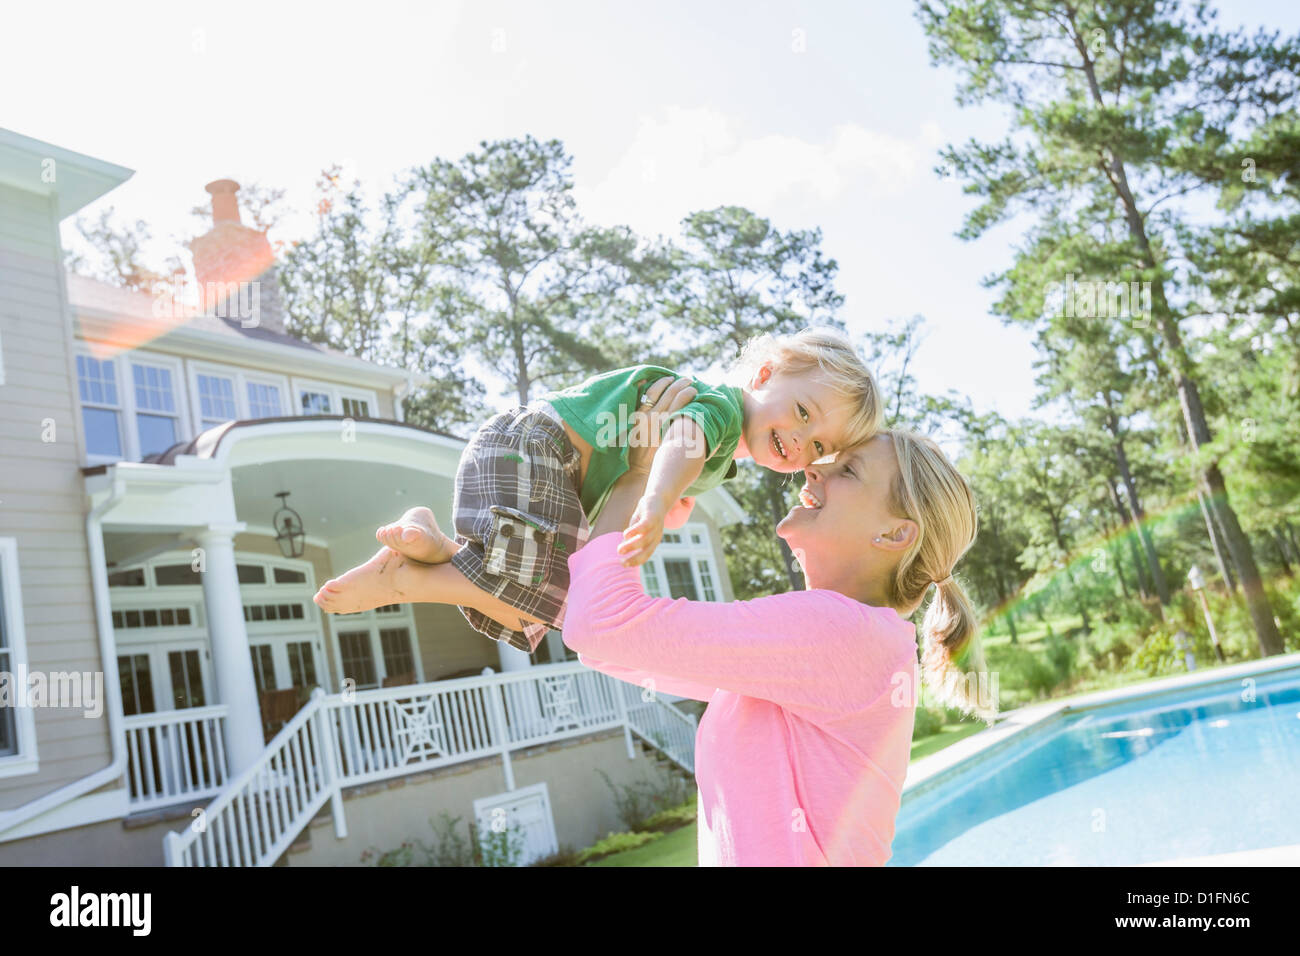 Caucasian mother and son playing in backyard Stock Photo